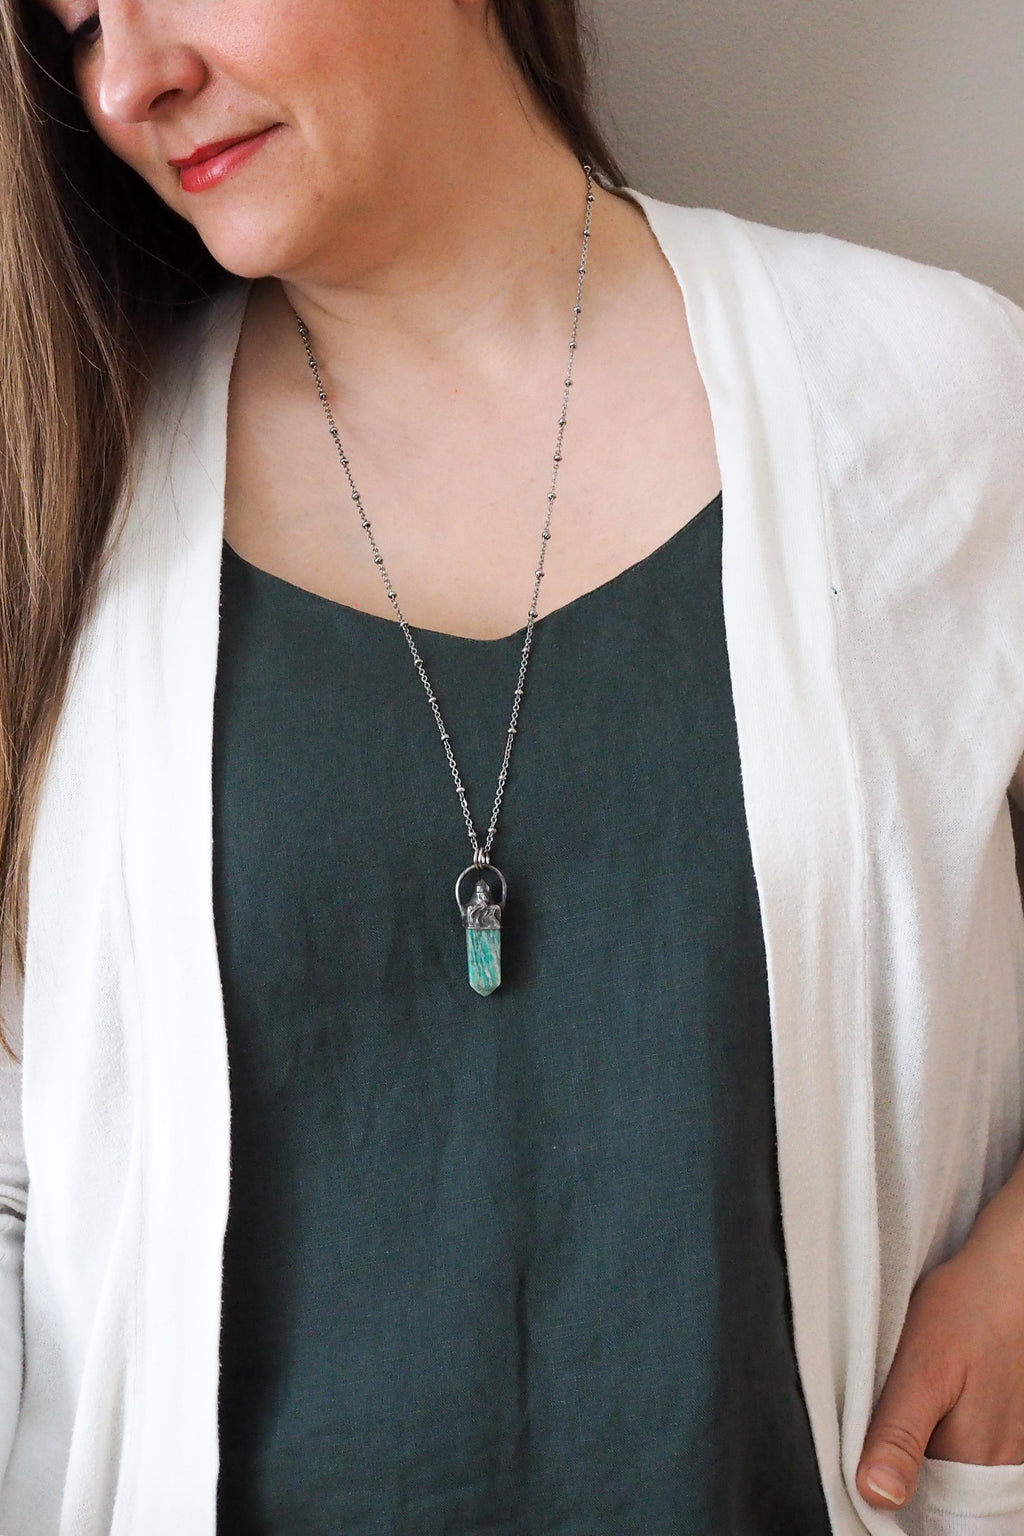 teal green gemstone healing crystal talisman necklace on woman in blue top with white cardigan